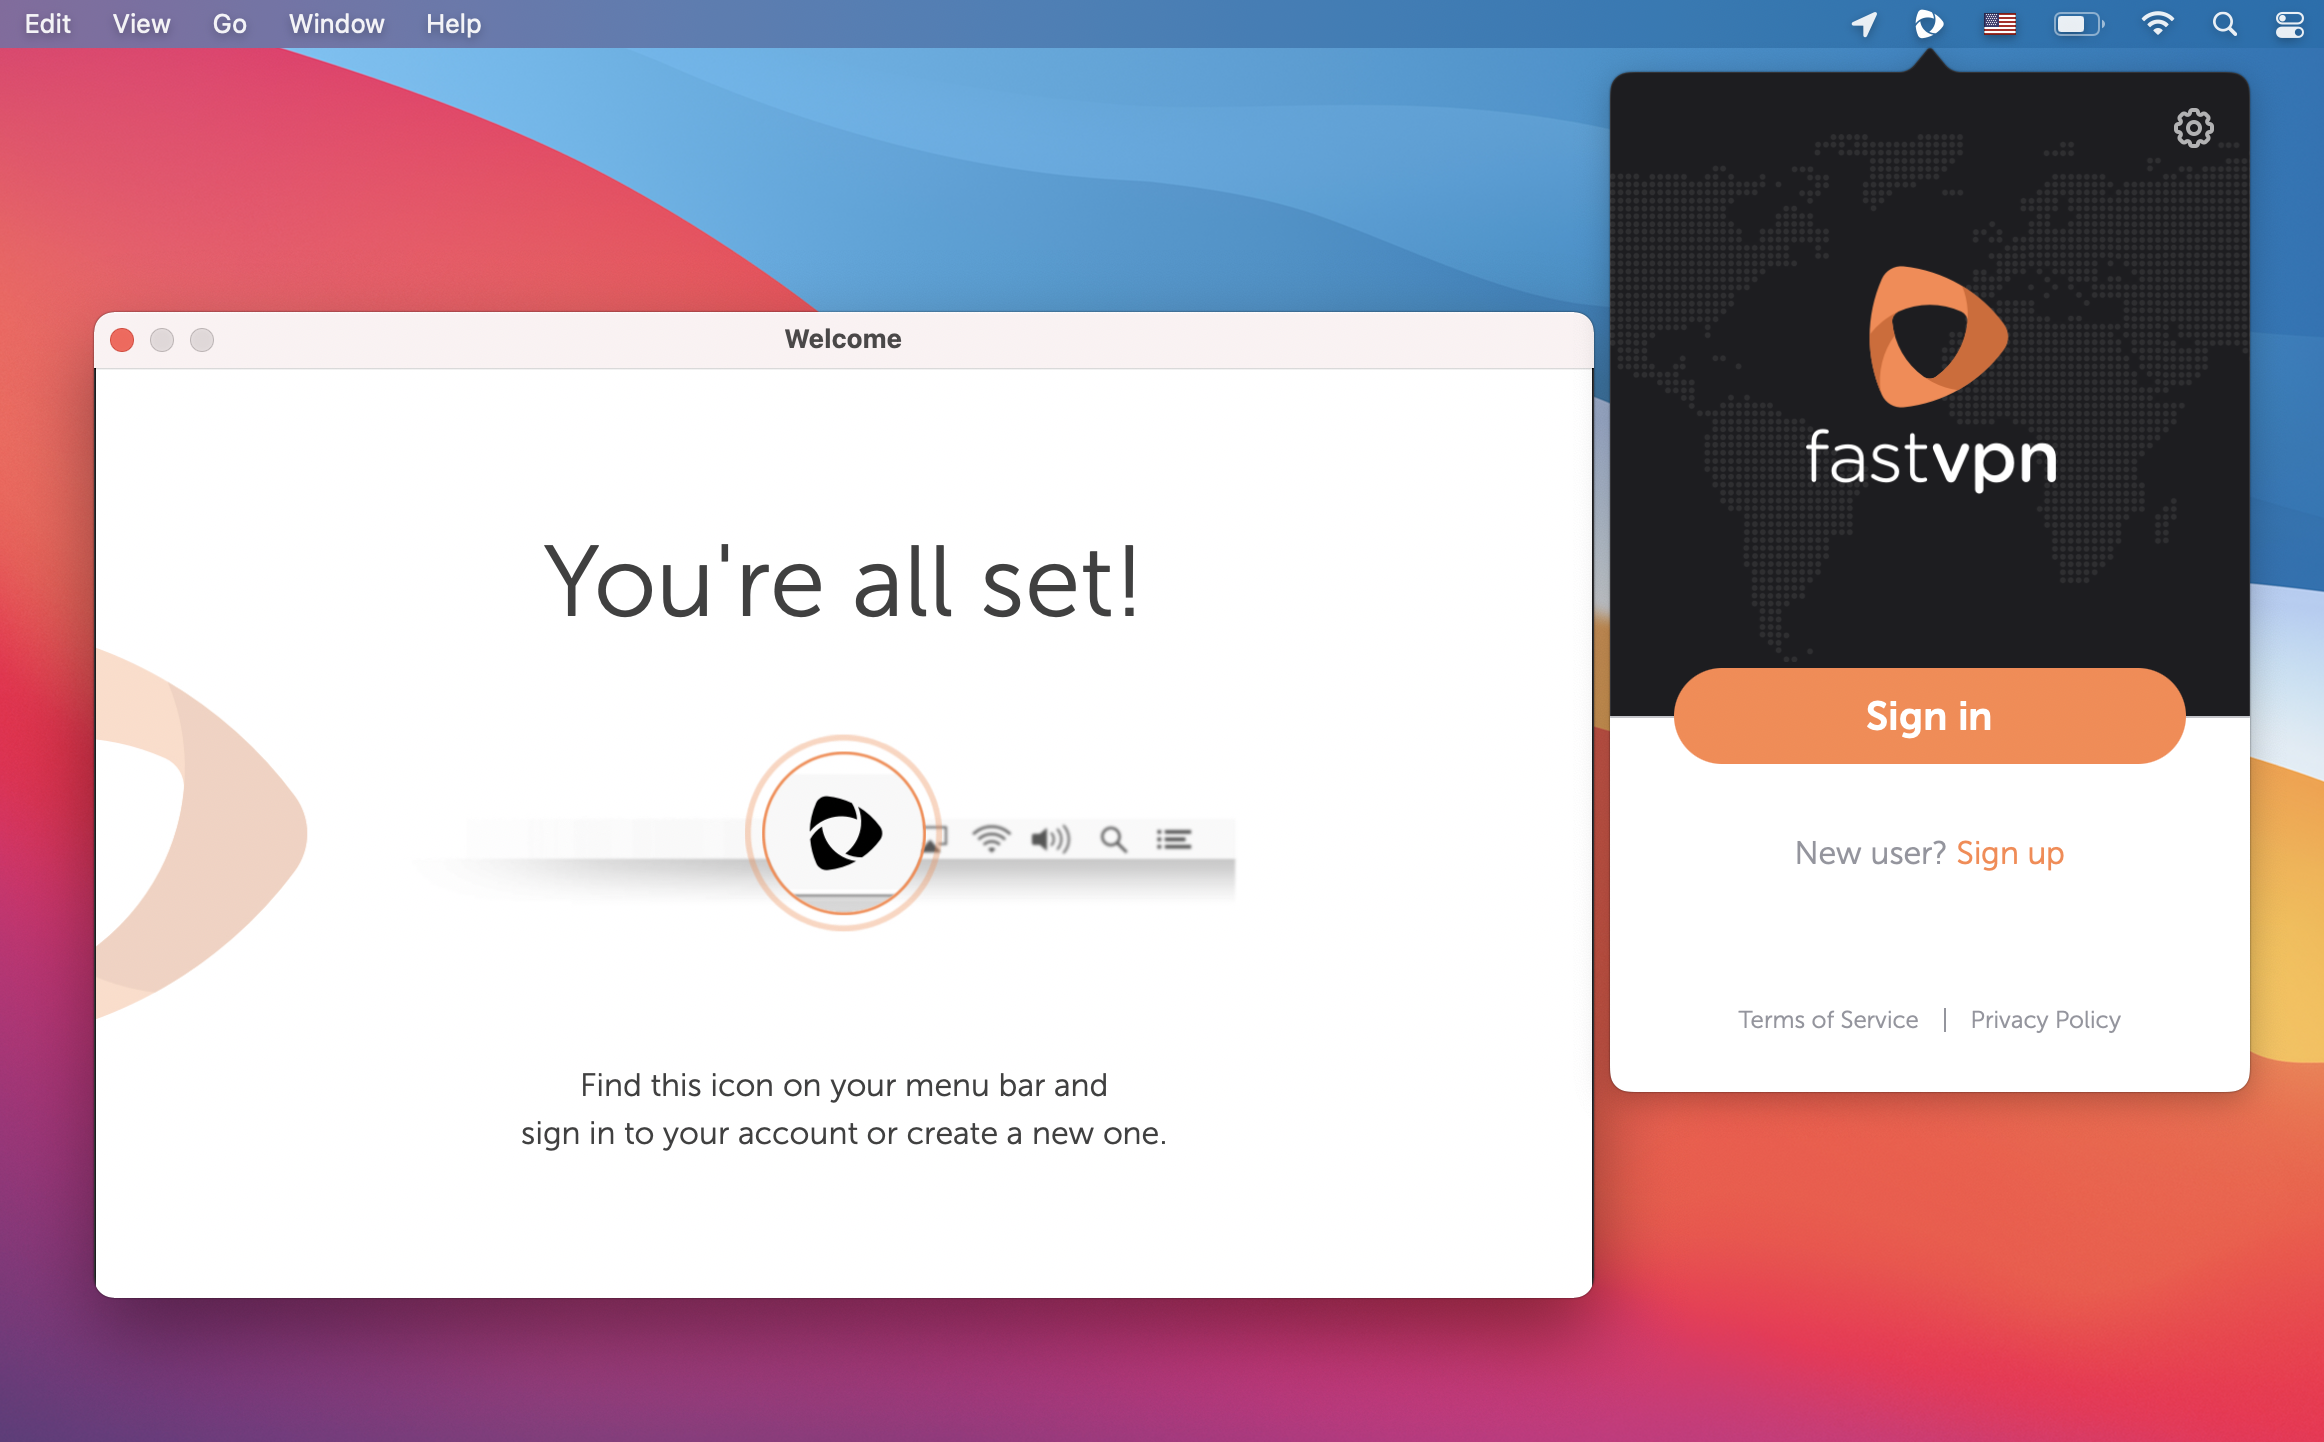 Example of a MacOS desktop with the FastVPN app launched